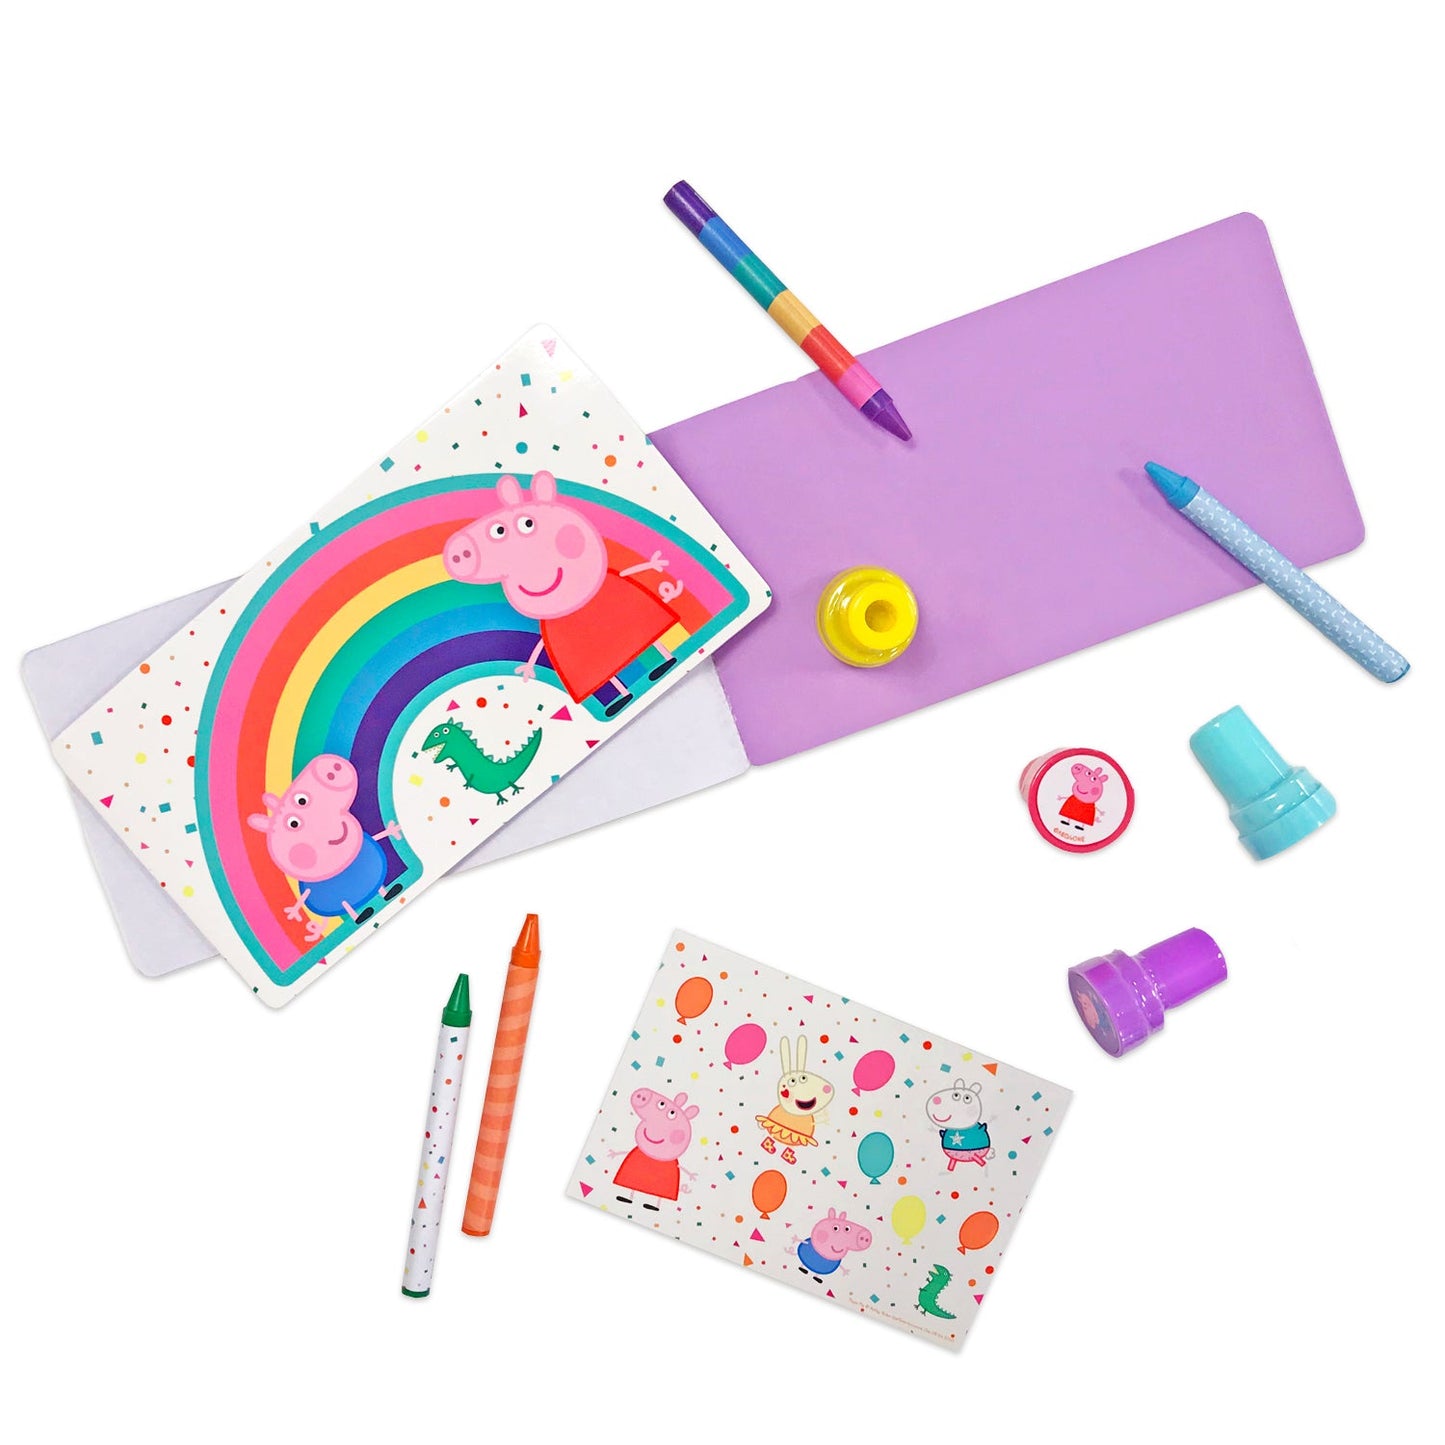 Peppa Pig Mega Mix Favour Pack includes 4 Sticker Sheets, 4 Notepads, 4 Crayons and 4 Stamps